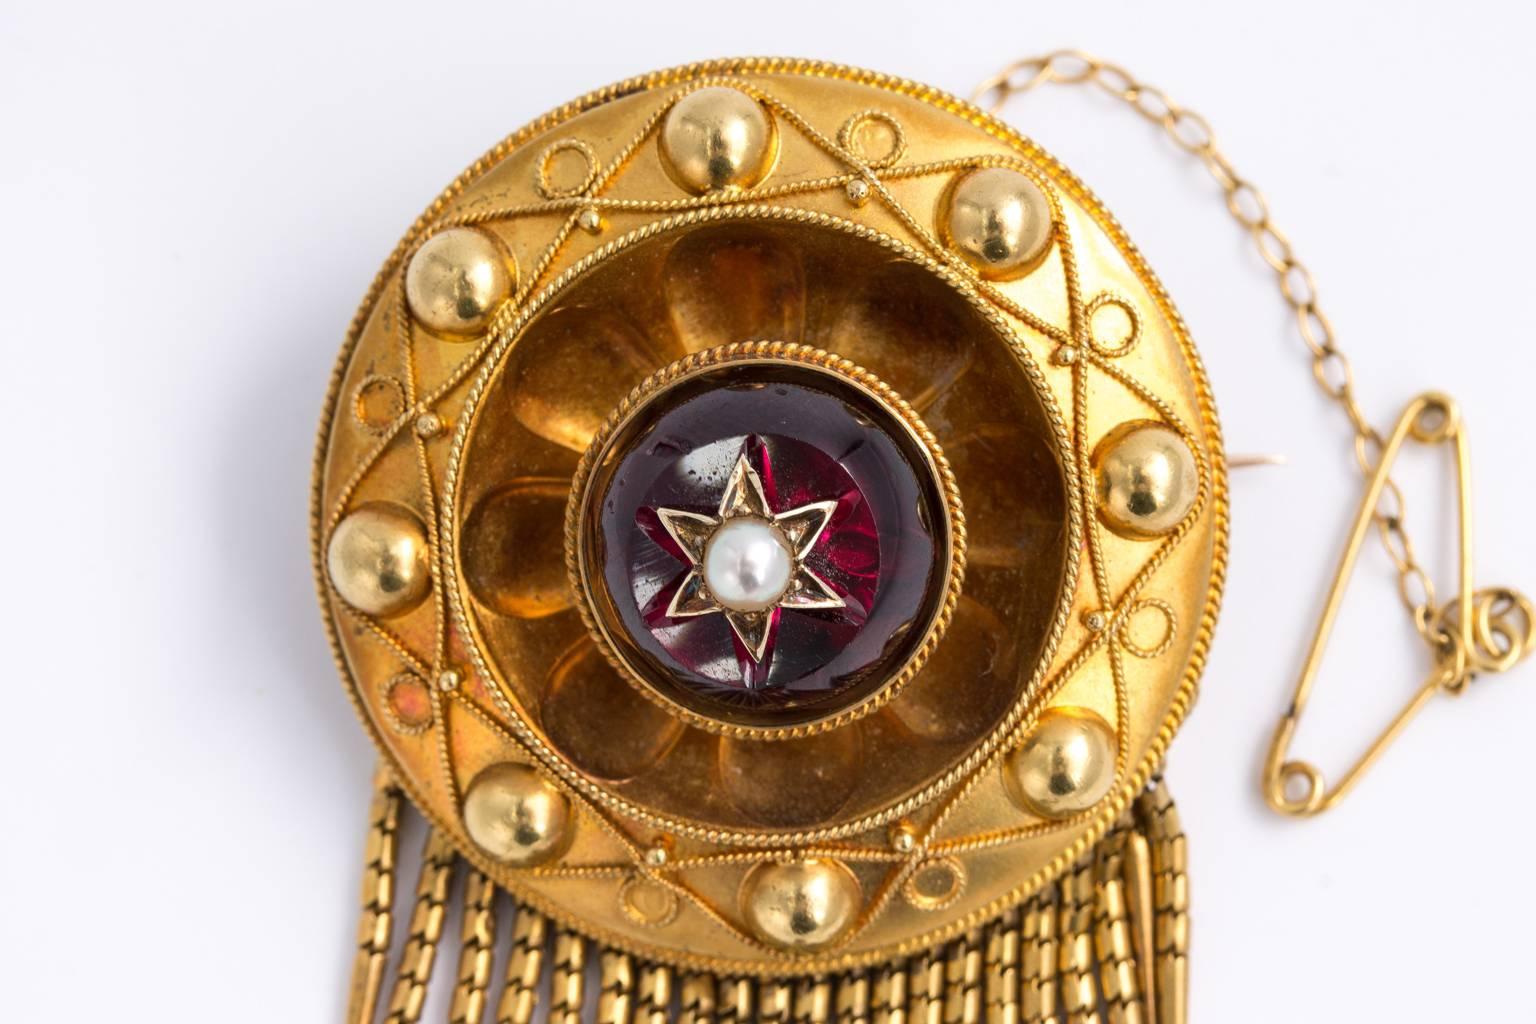 A superb English Mid Victorian 1860's 15 kt locket brooch with its own original box. the front having finely engraved surround. The center set with faceted casbashiang shaped garnet with pearl inserts and granulated flexible fringe featuring central